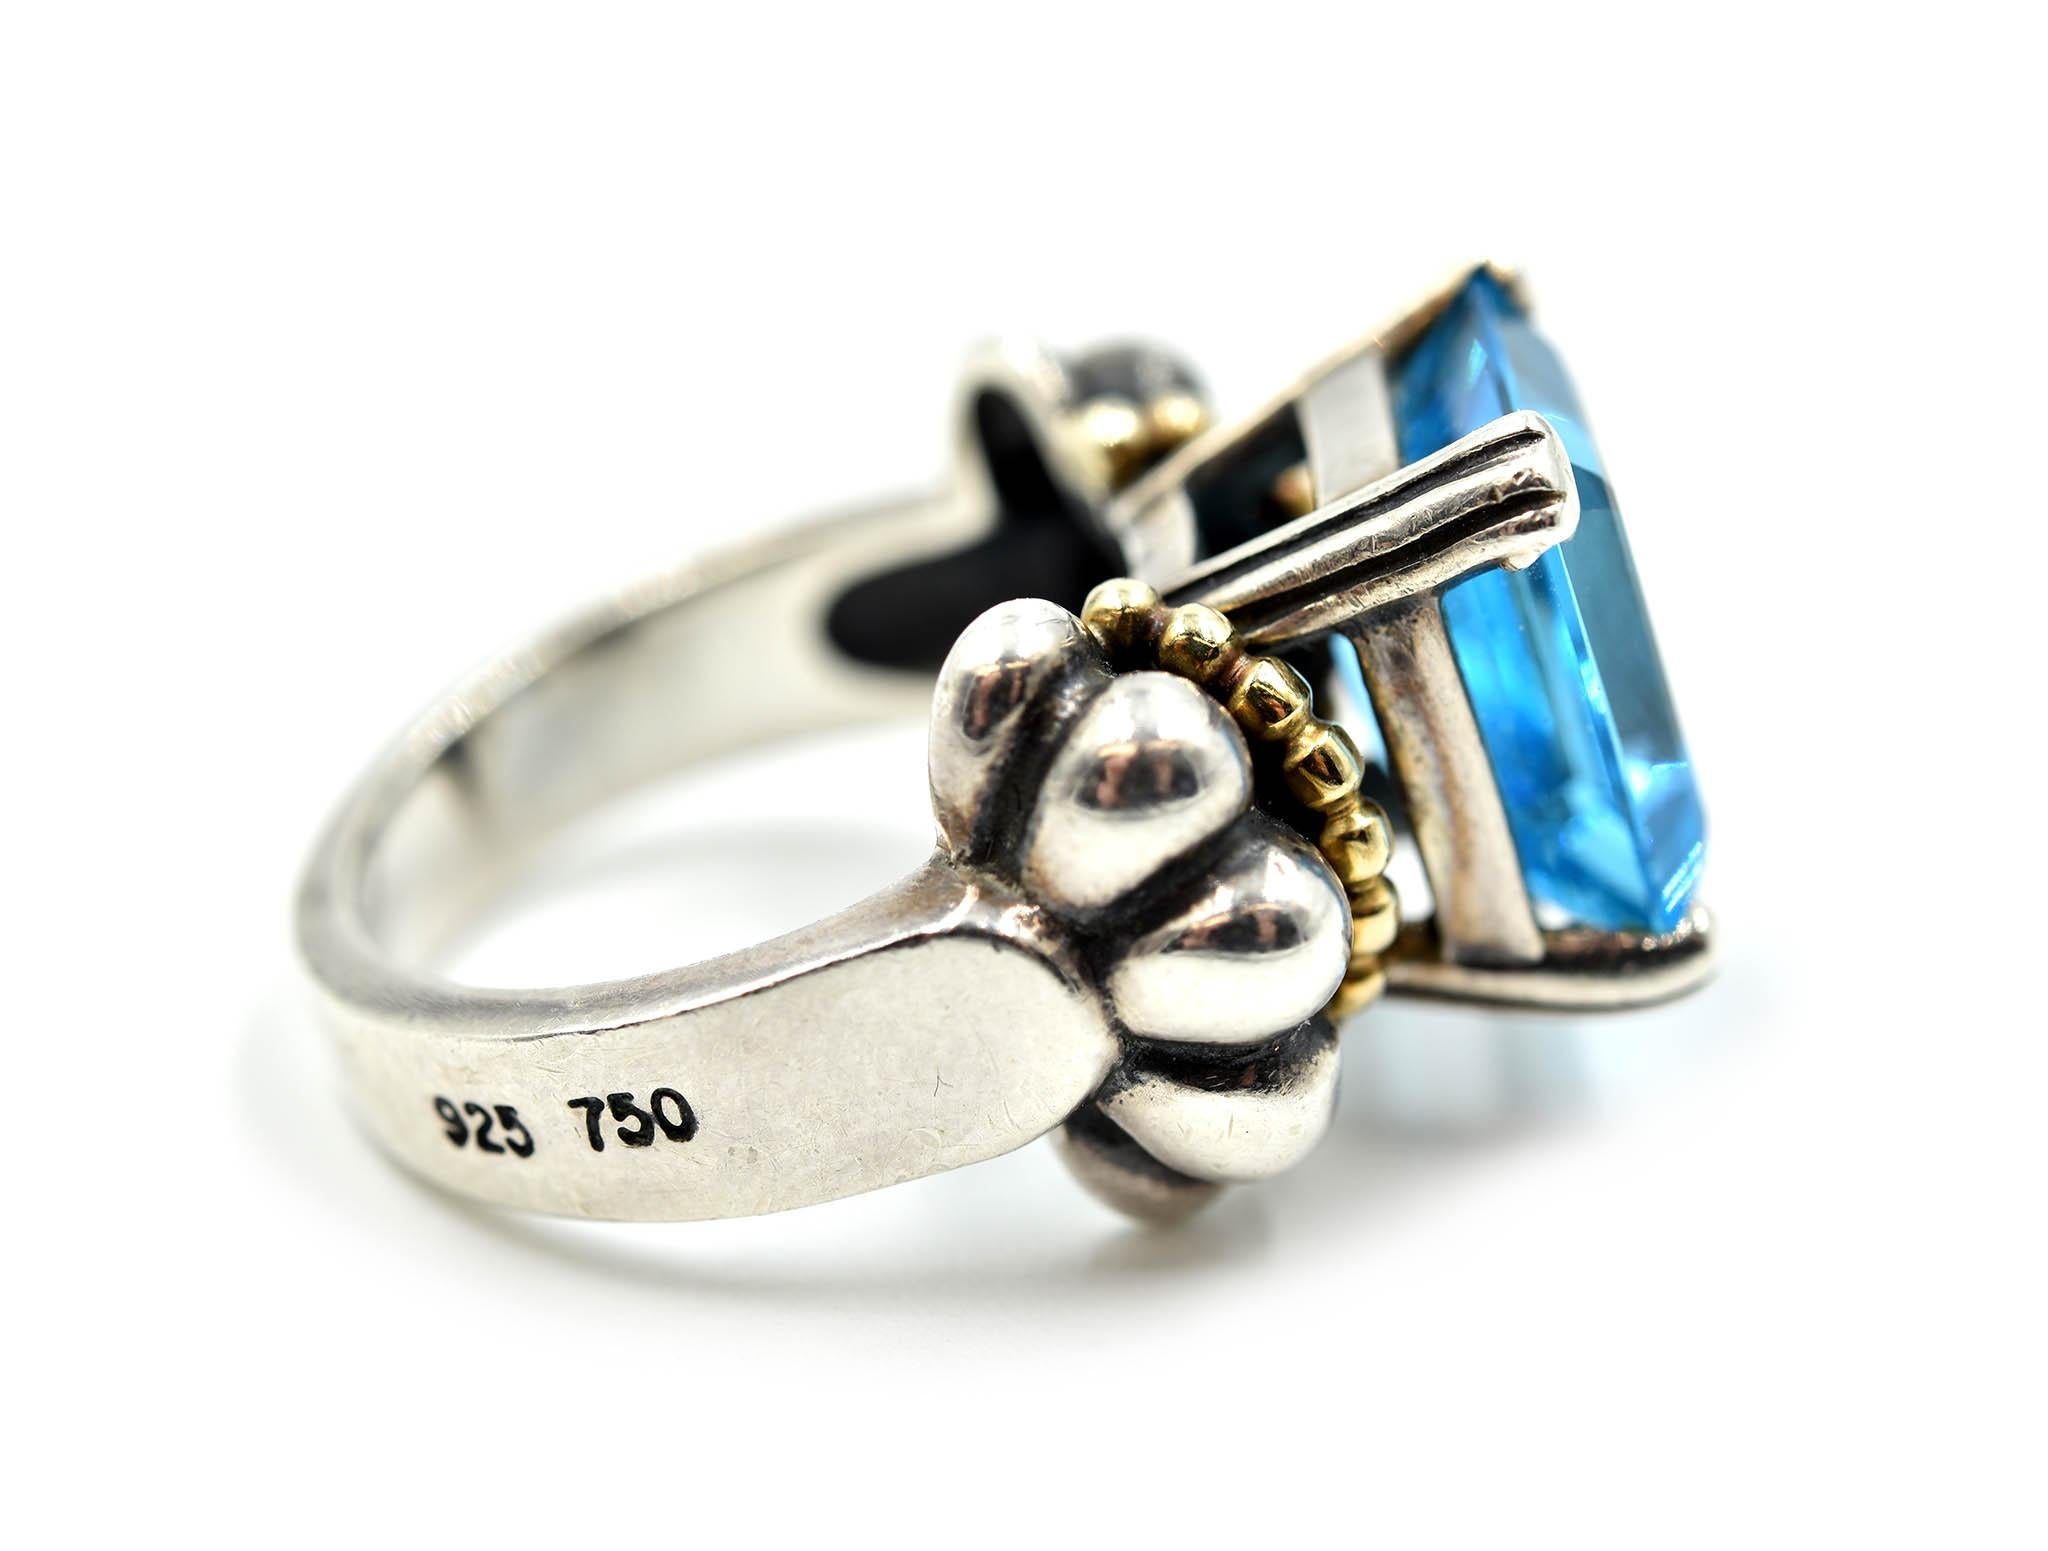 An awesome creation of jewelry by Lagos featuring a step cut blue topaz! The blue topaz measures 12.15mm long and 10.11mm wide. The blue topaz weighs 6 carats. The mounting is made with sterling silver and 18k yellow gold. Band size is 6.5 and total